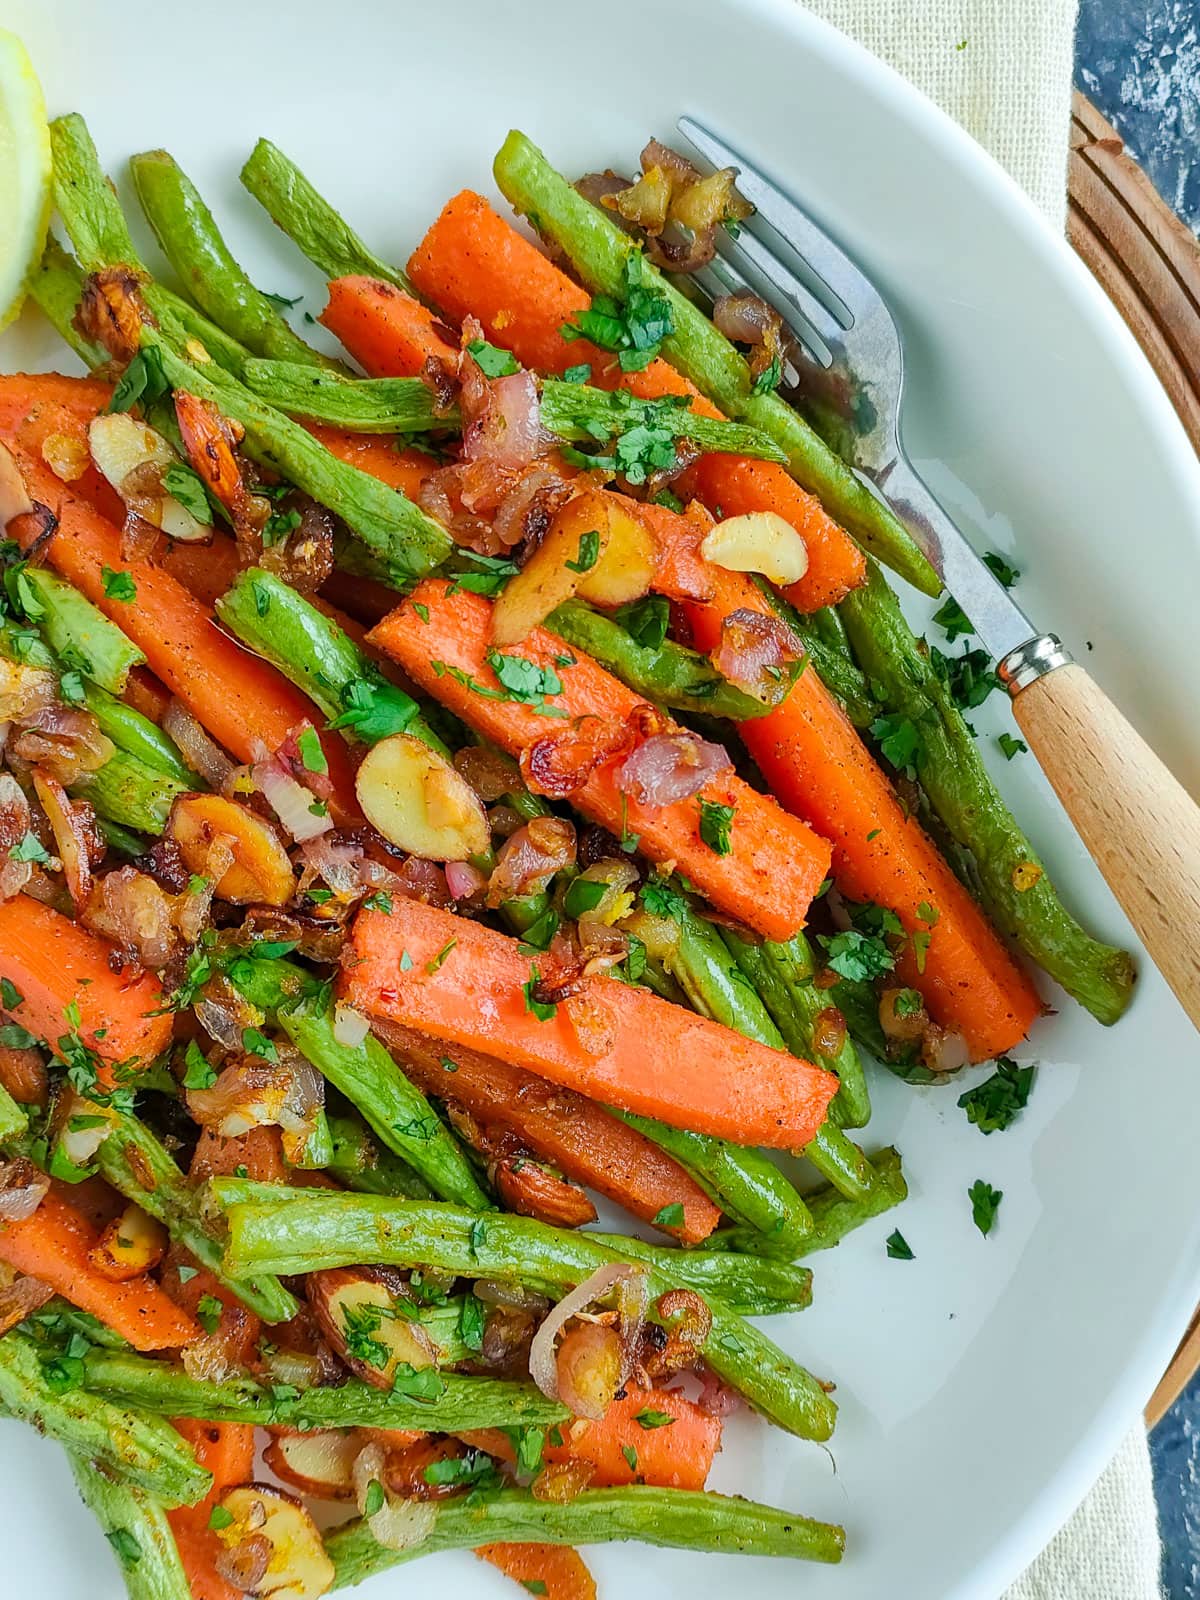 Roasted carrots and green beans with toasted almond topping and lemon wedges on a white plate.